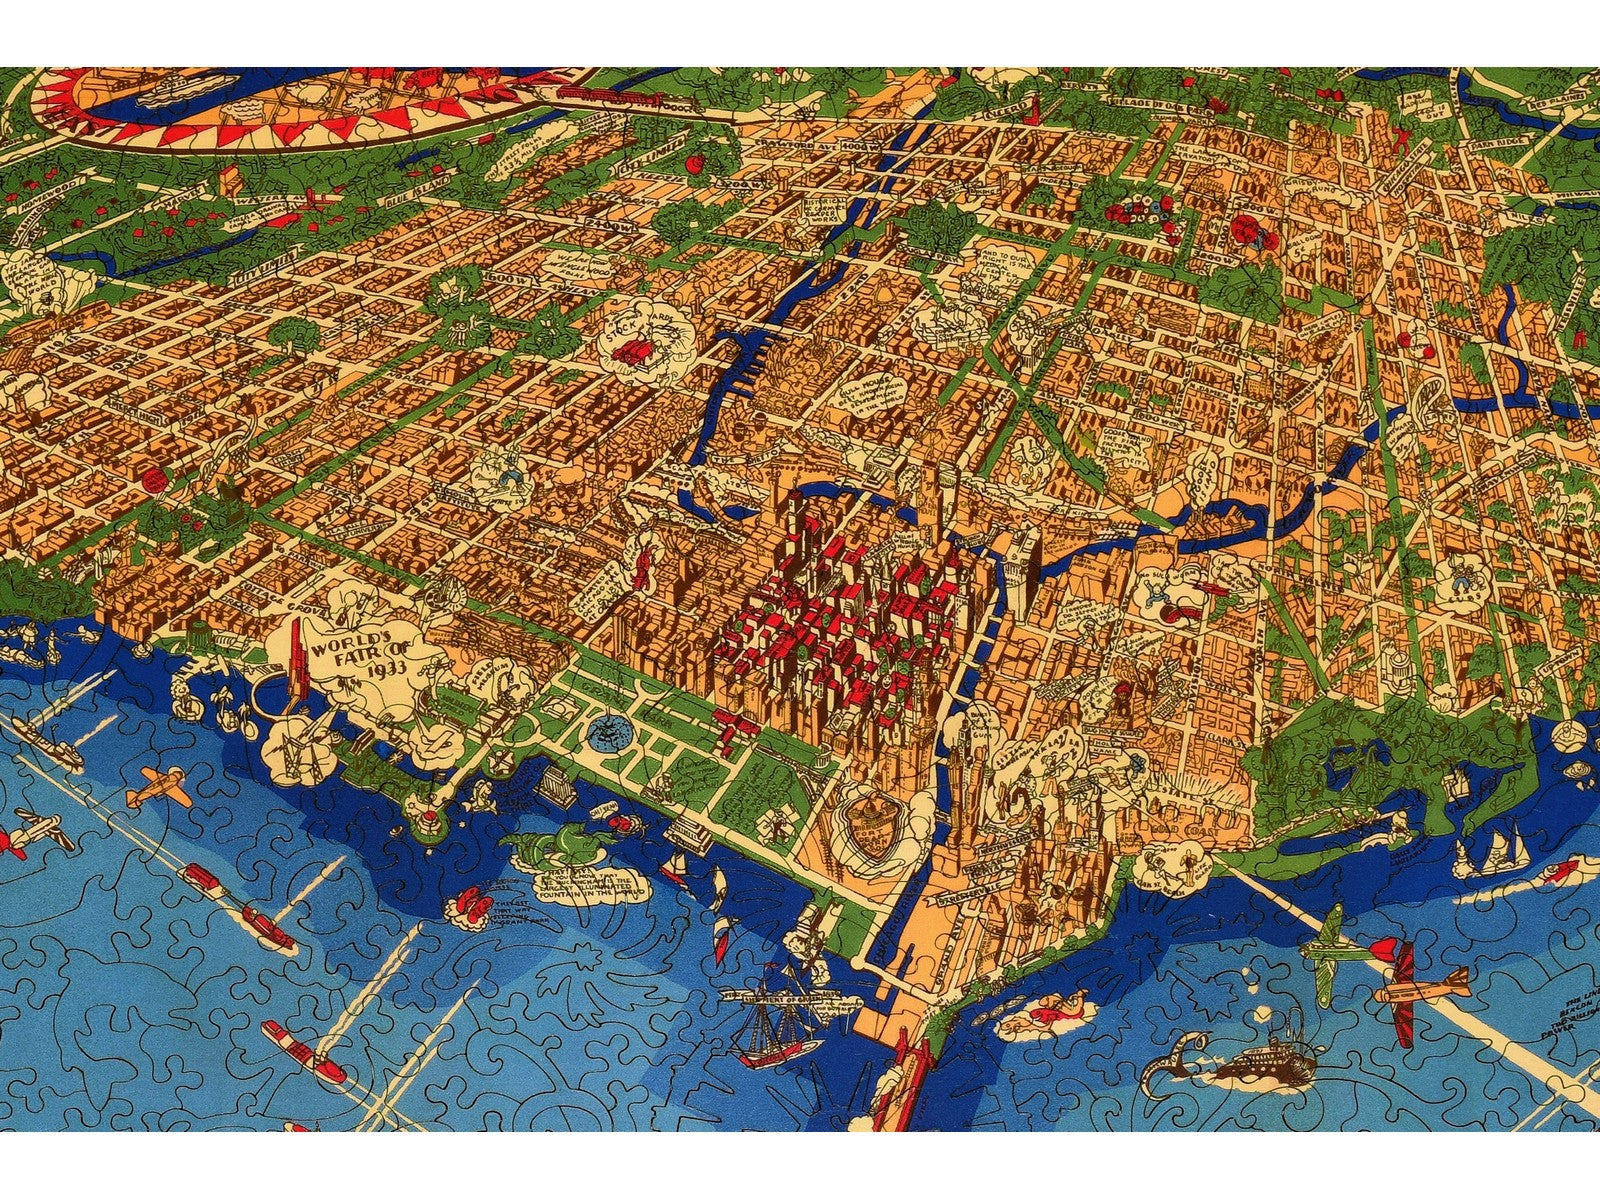 A closeup of the front of the puzzle, An Illustrated Map of Chicago, showing the detail in the pieces.